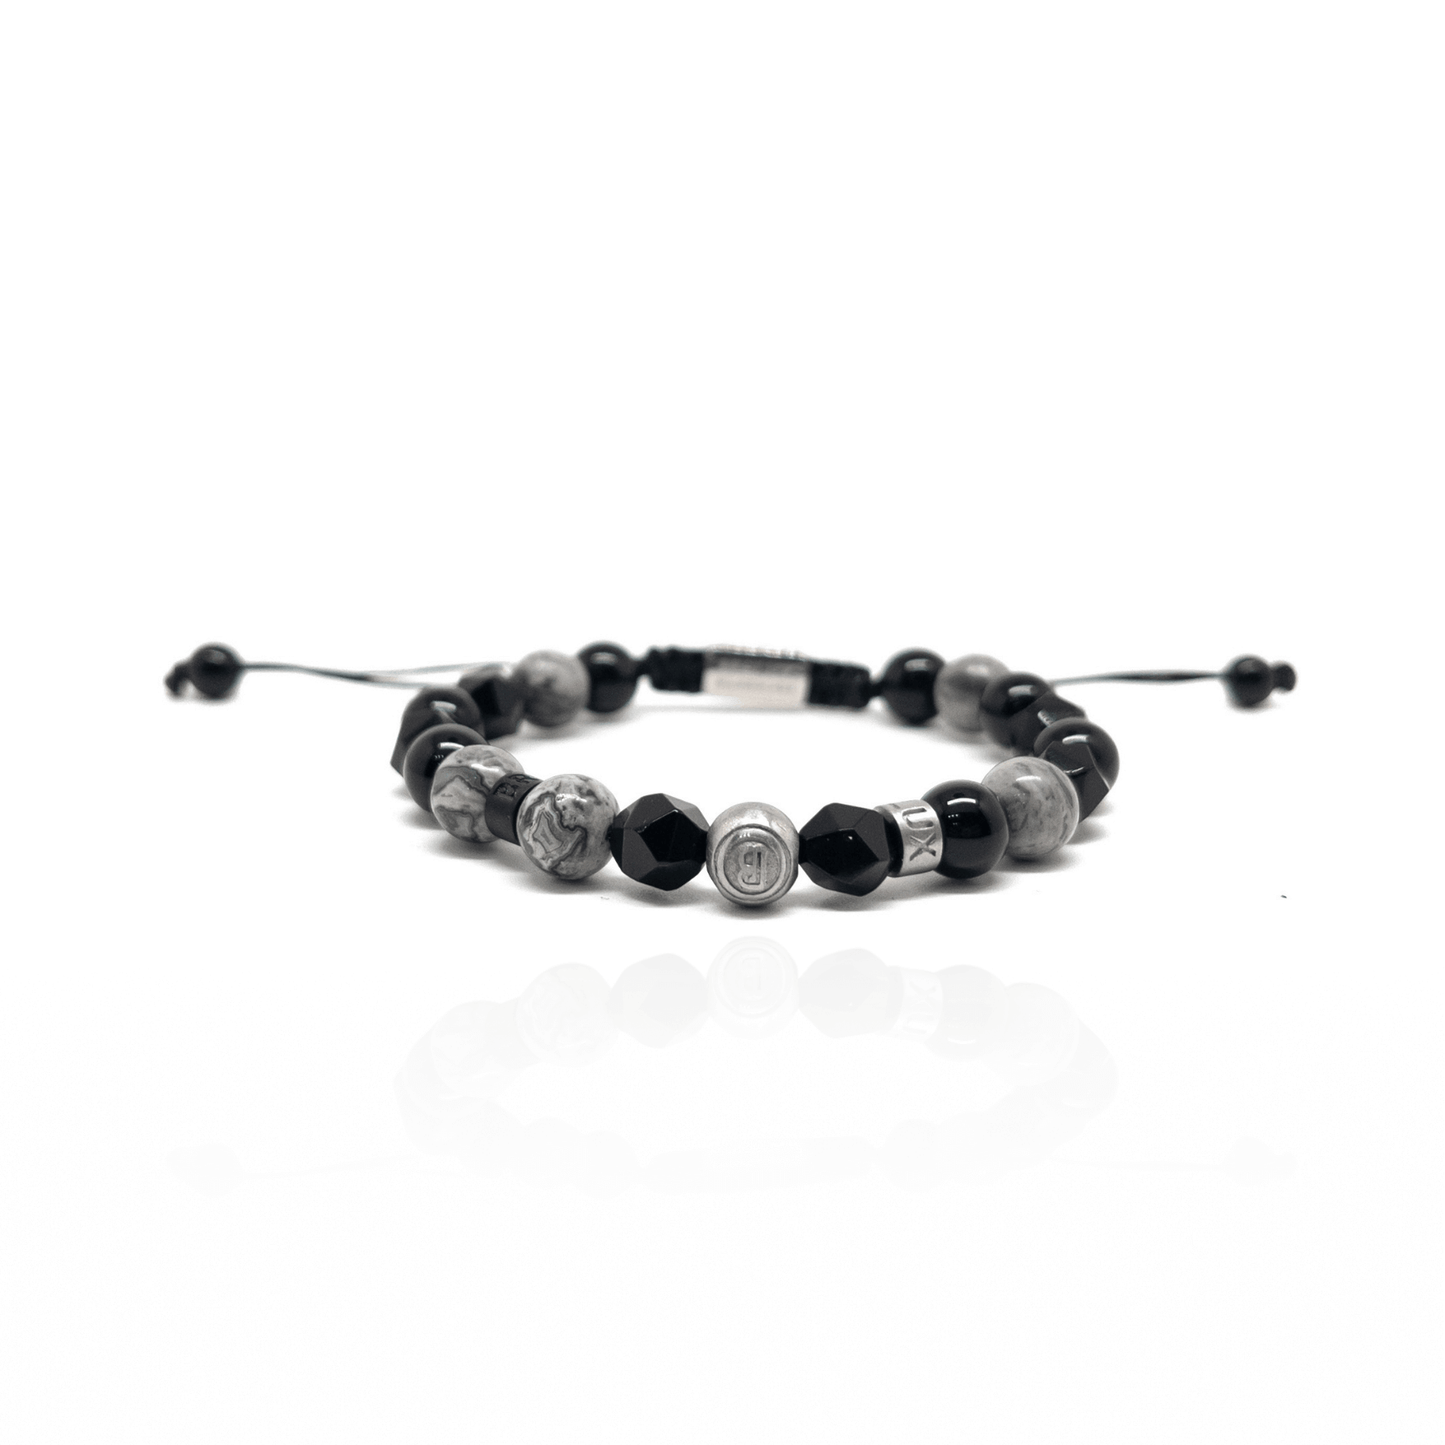 The Grey and Obsidian Signed Thread Bracelet